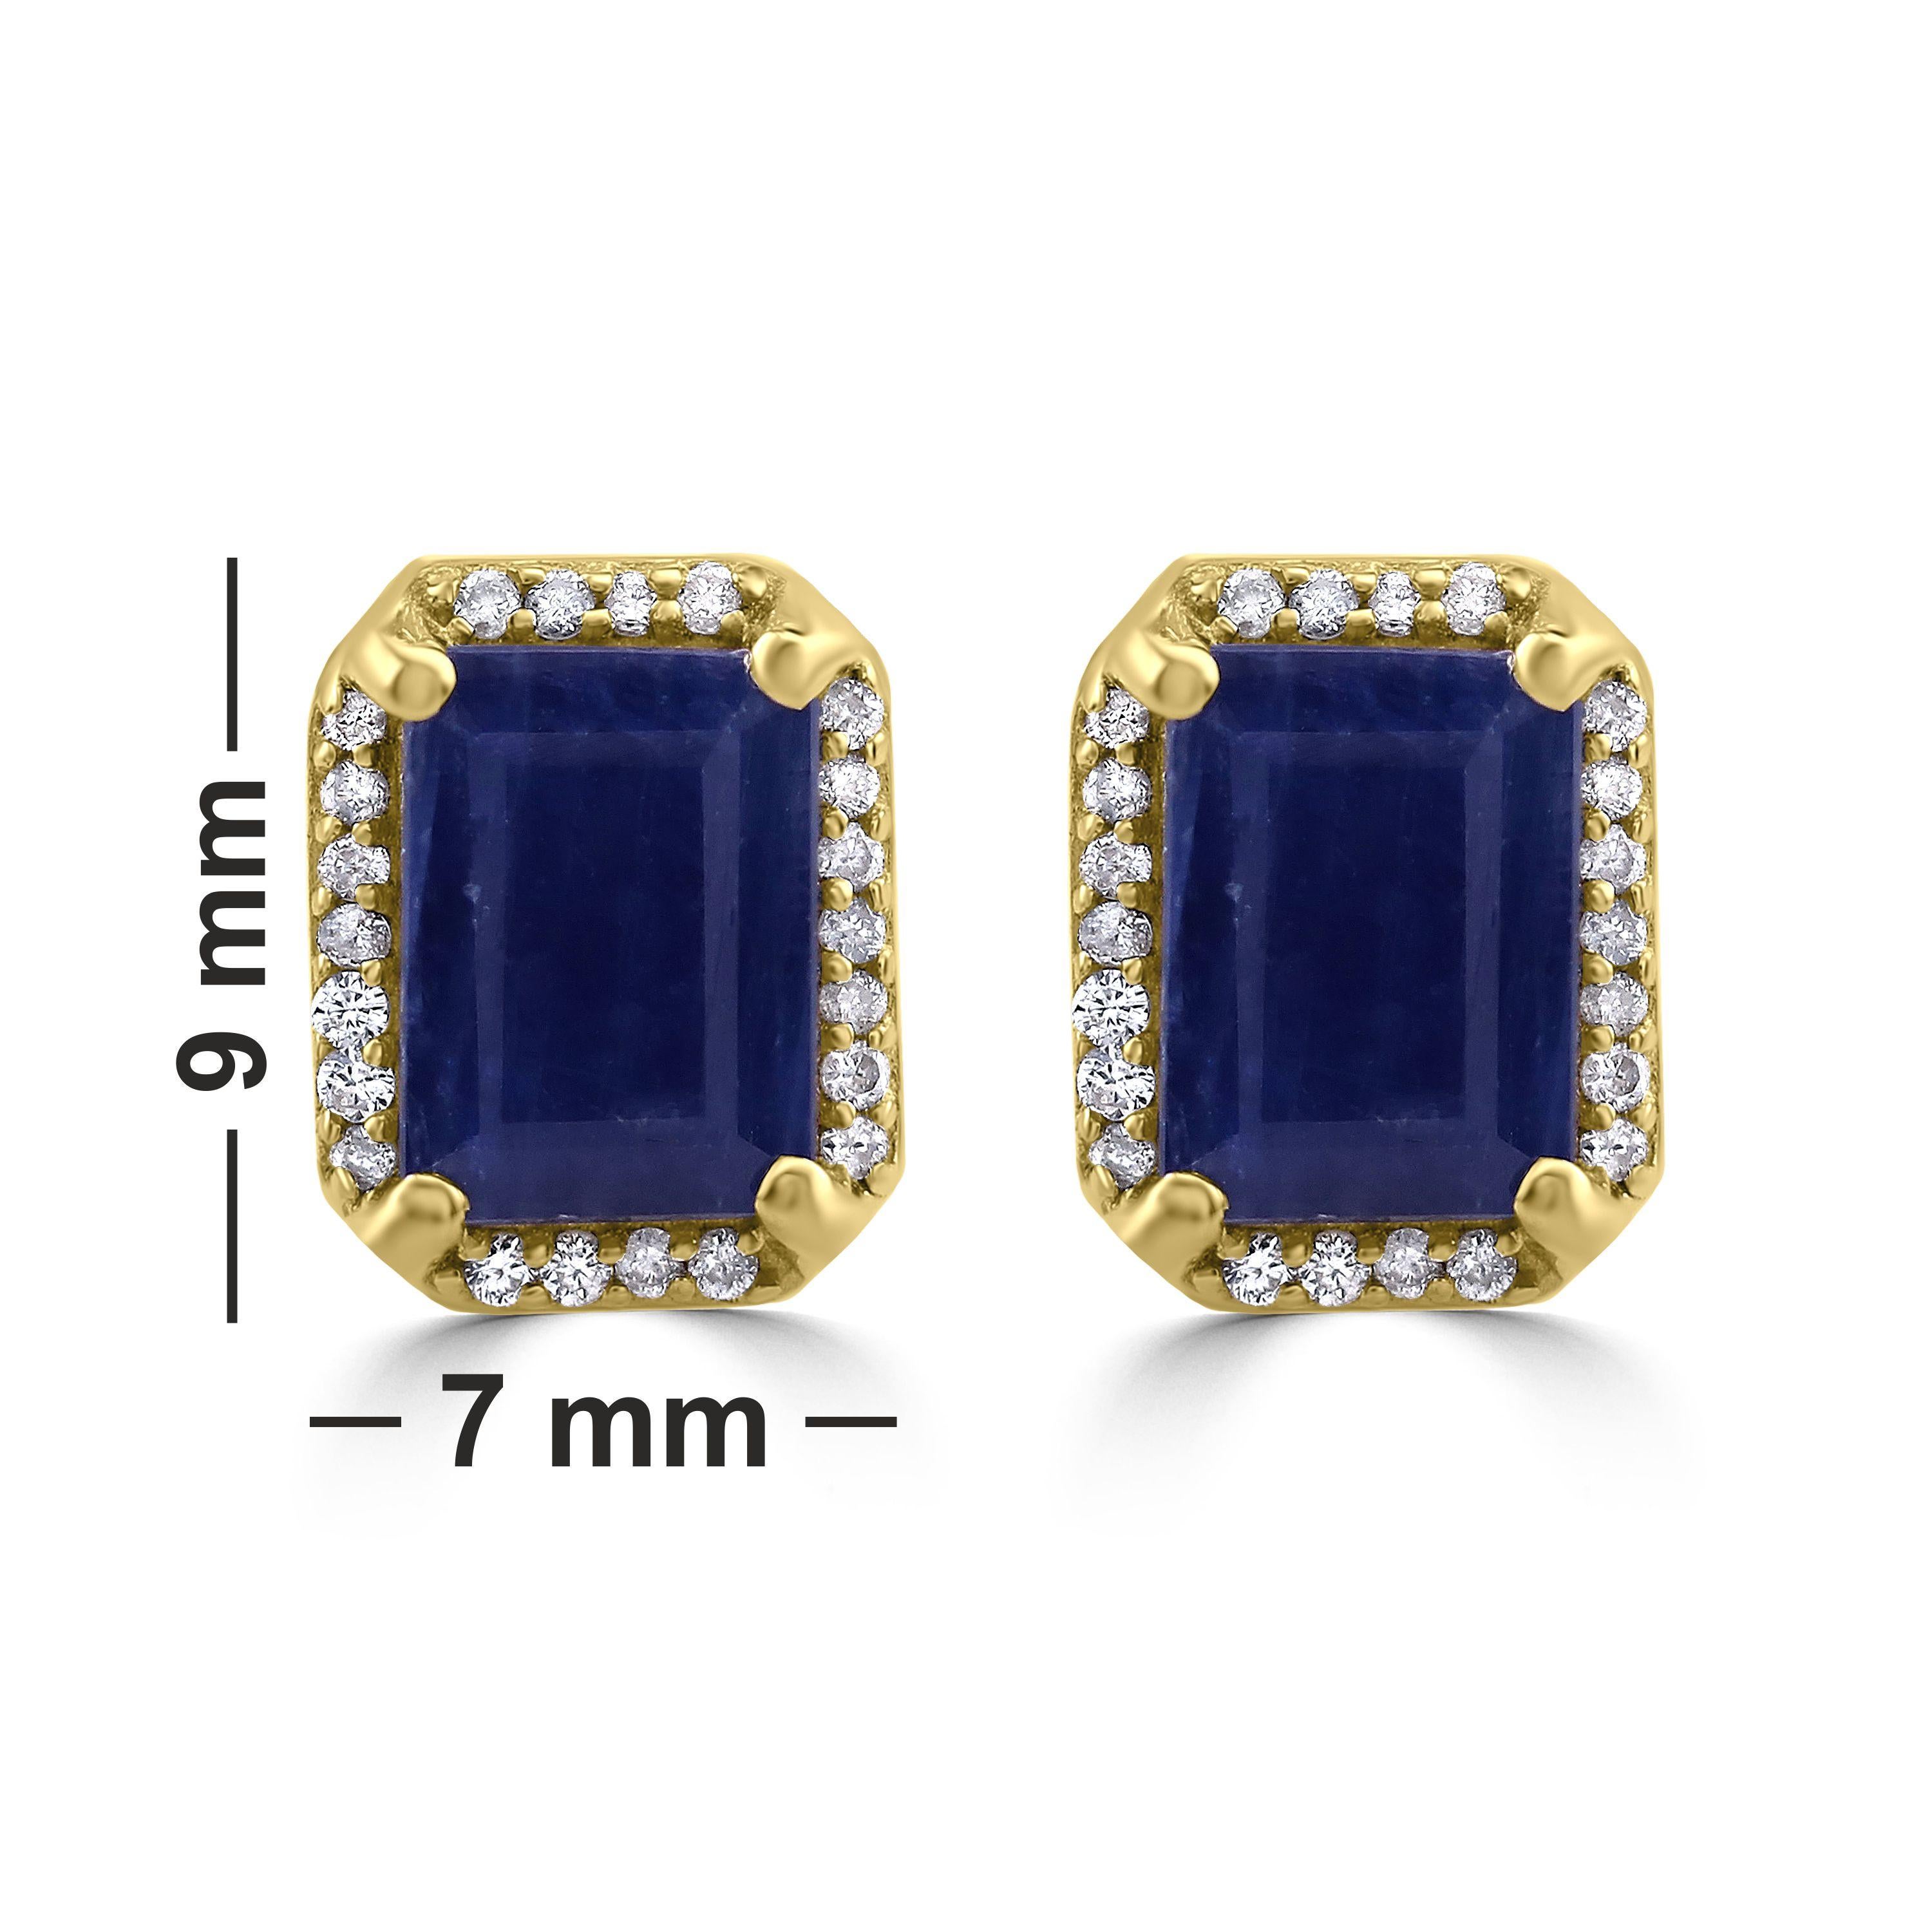 Gemistry 2.9 Carat Octagon Blue Sapphire Stud Earrings with Diamond in 14K Gold In New Condition For Sale In New York, NY